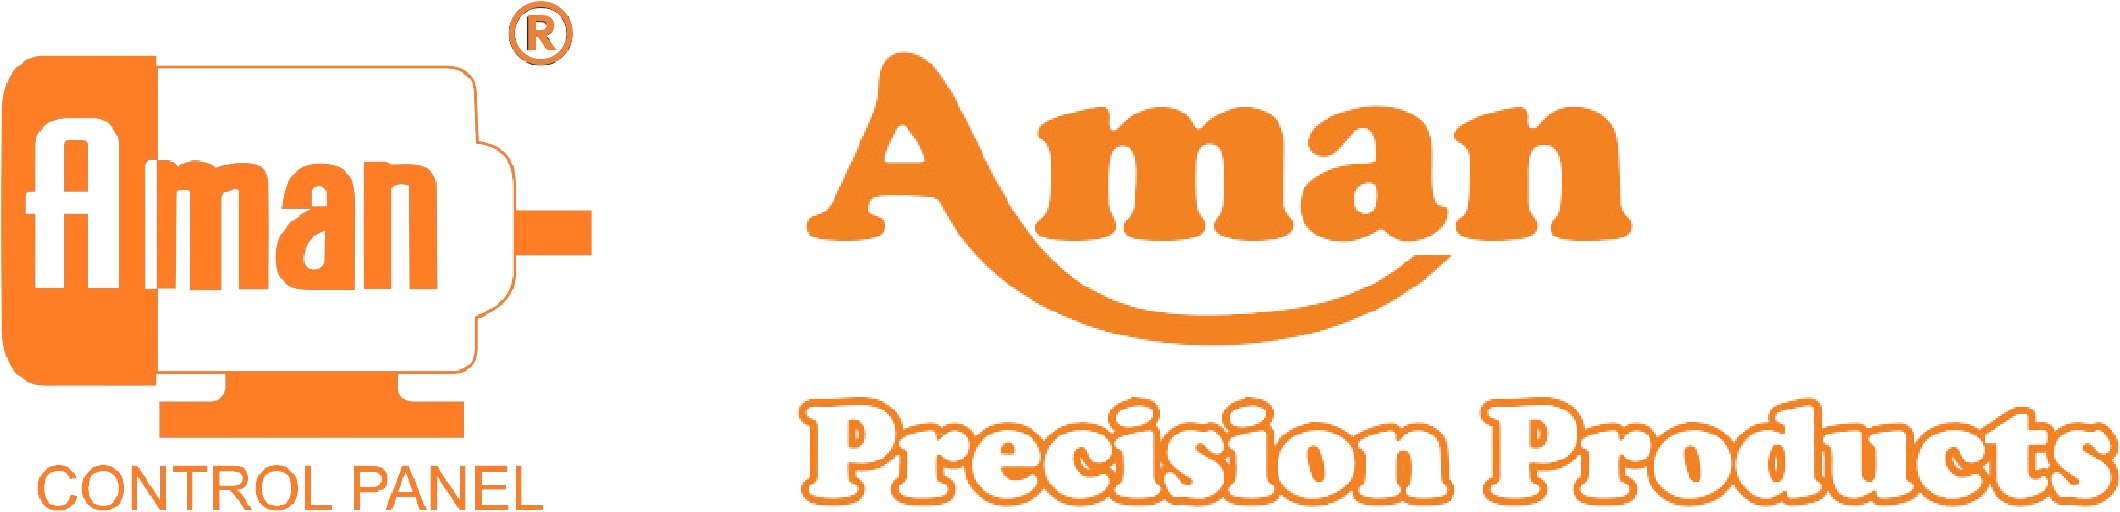 Aman Precision Products